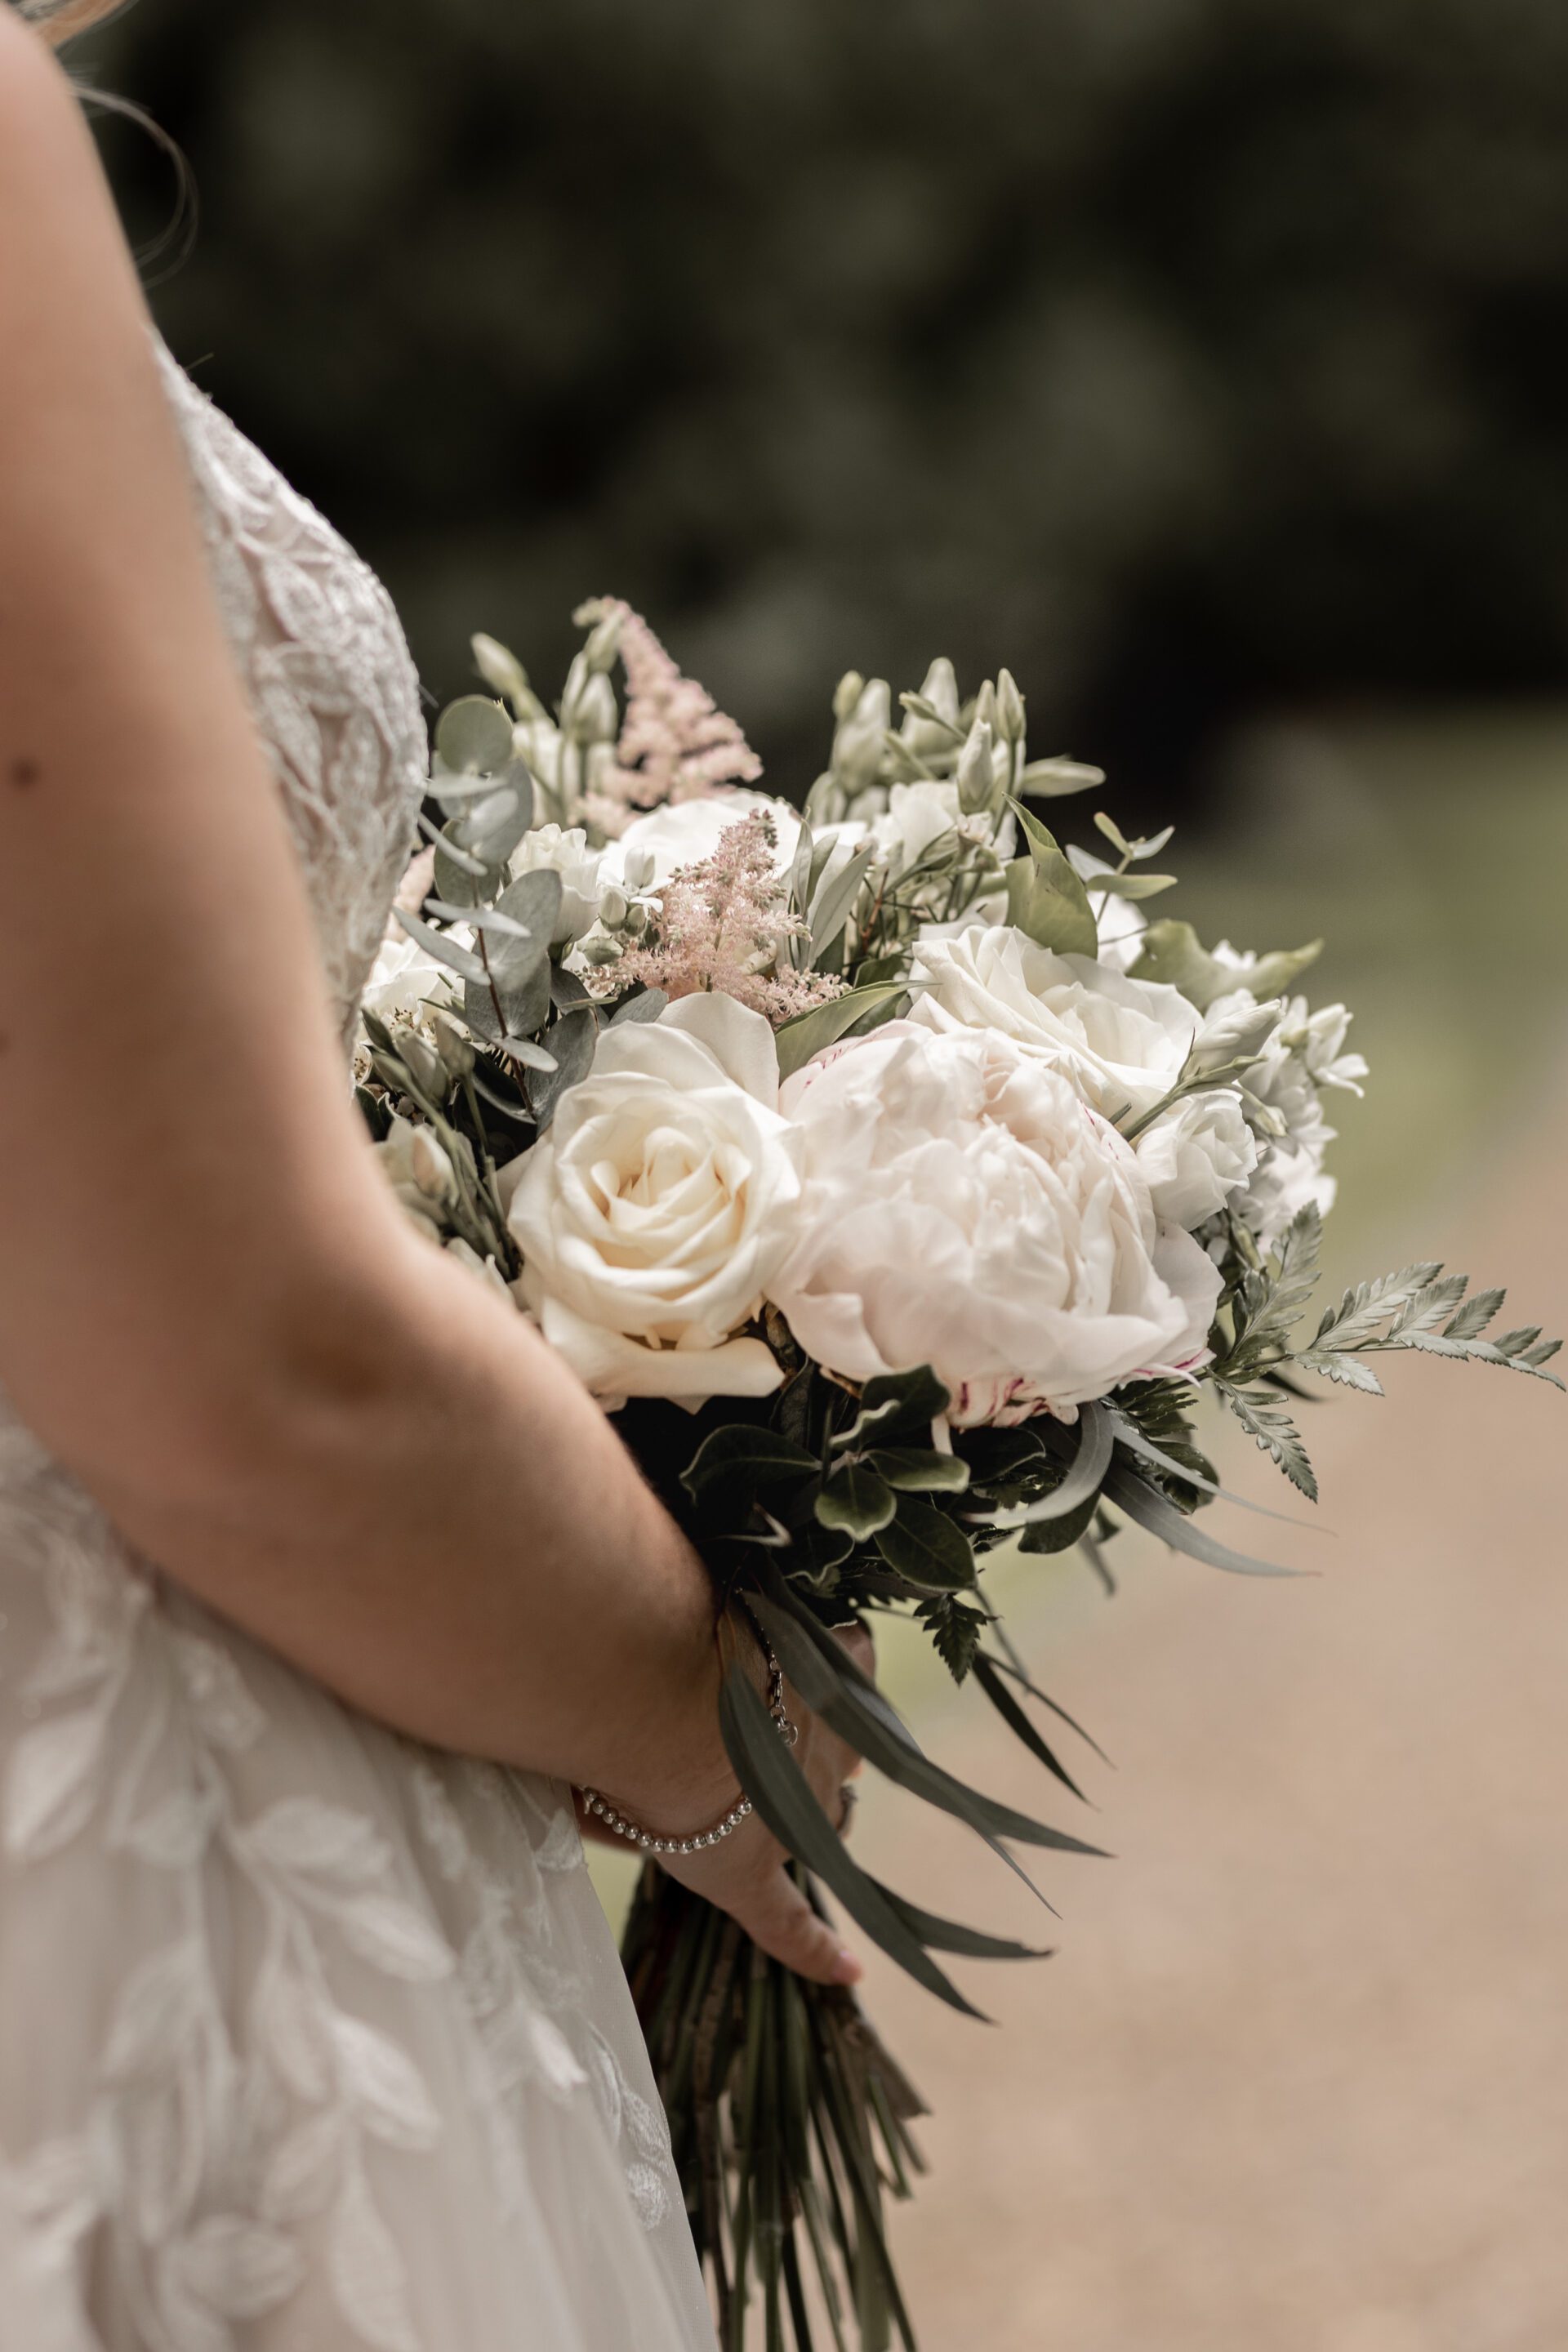 The bride holds a beautiful bouquet from Sonning Flowers